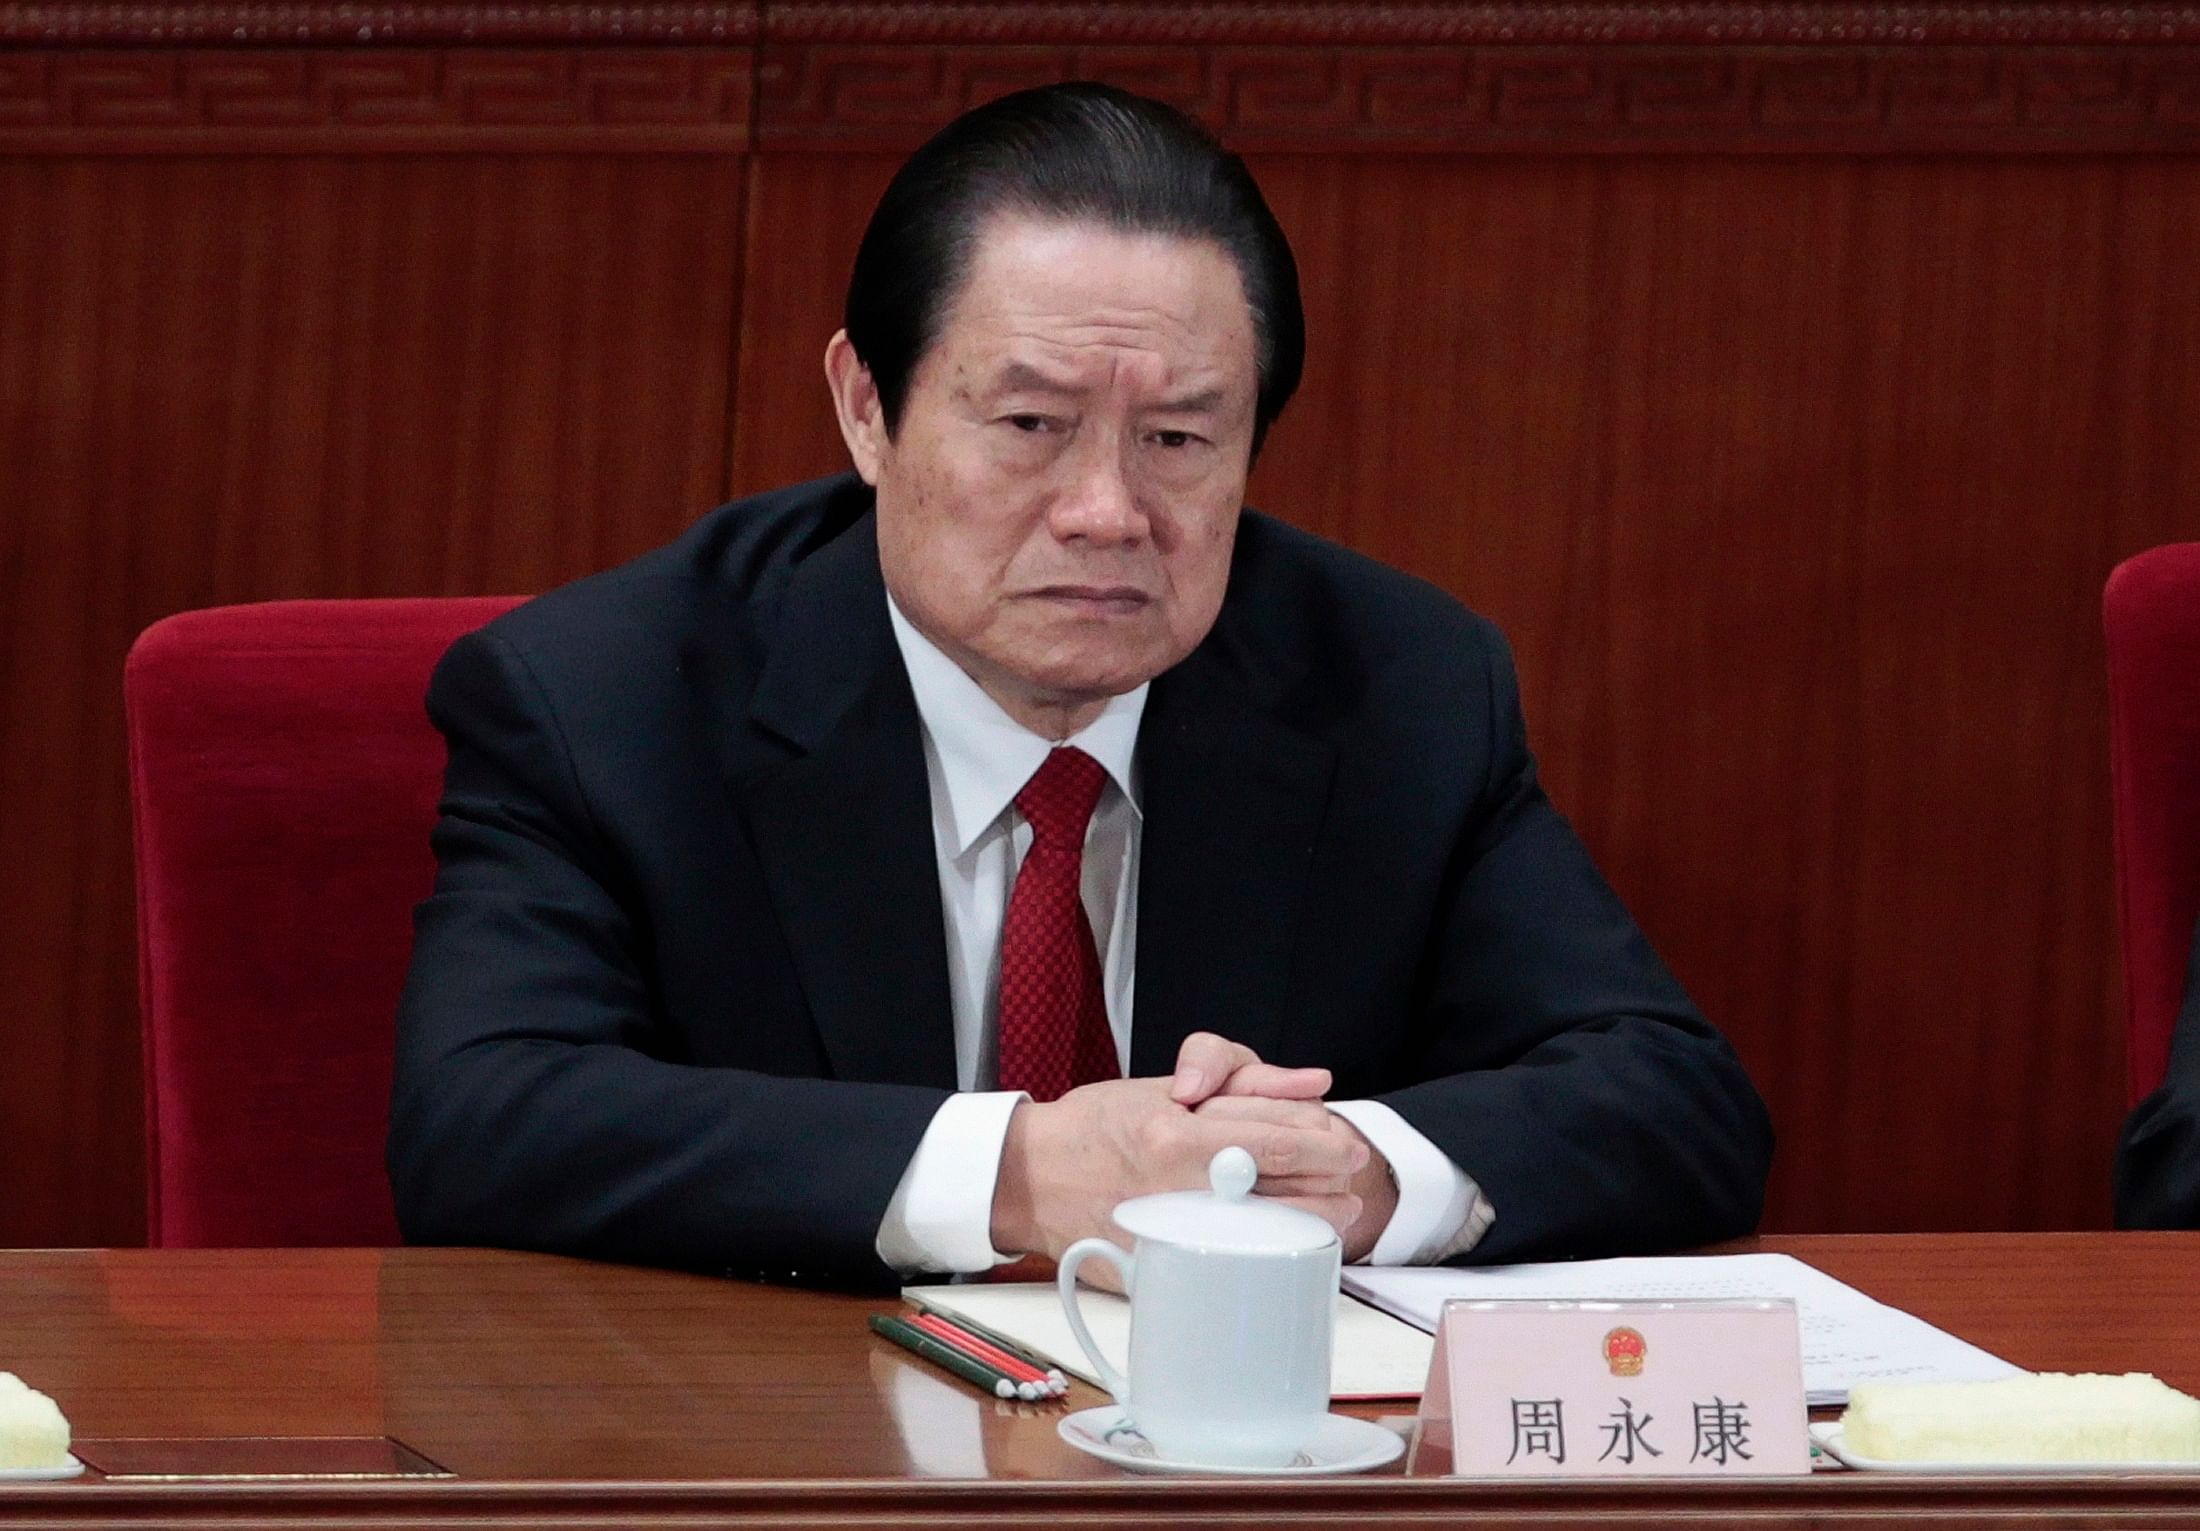 China's former Politburo Standing Committee Member Zhou Yongkang attends the closing ceremony of the National People's Congress (NPC) at the Great Hall of the People in Beijing in this March 14, 2012 file photo. Photo: Reuters